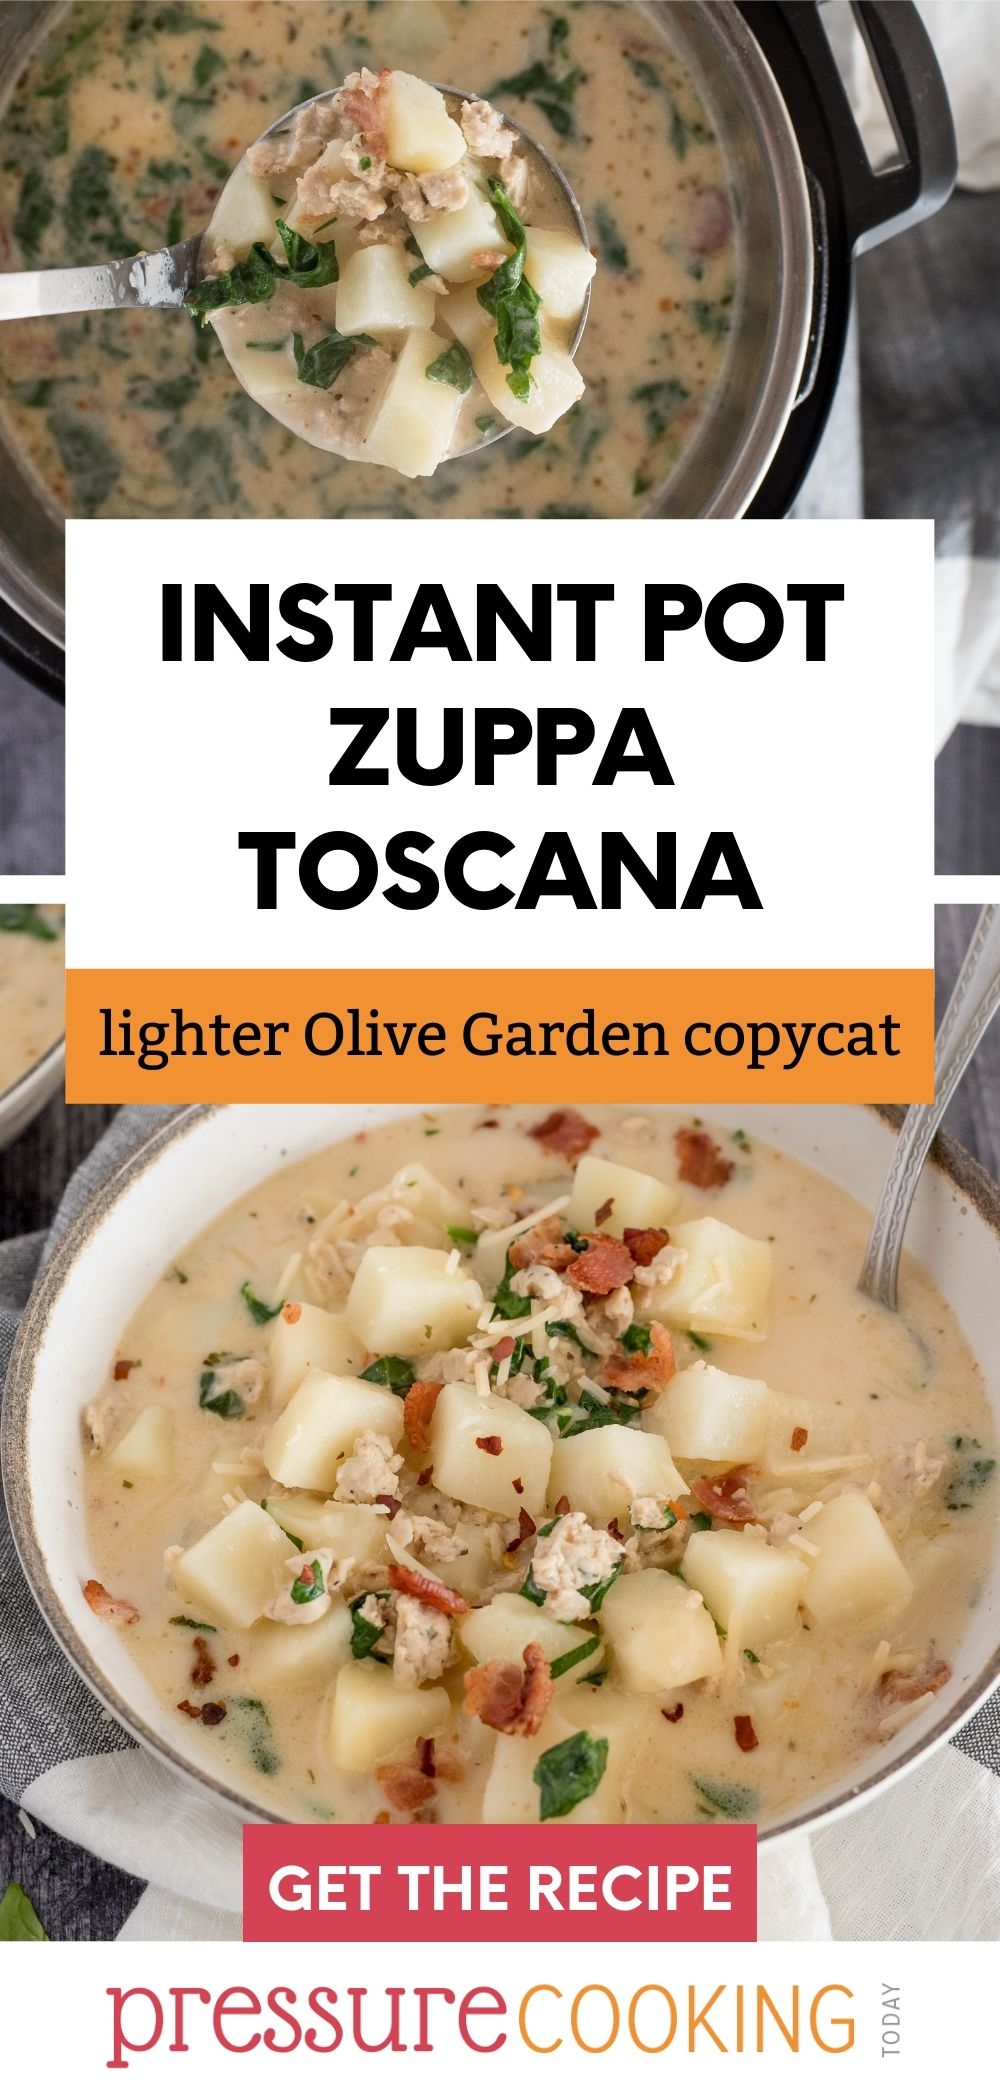 Instant Pot Zuppa Toscana is an Olive Garden copycat made with tender potatoes, chicken sausage and bacon—but no heavy cream so it's lighter! #PressureCookingToday via @PressureCook2da